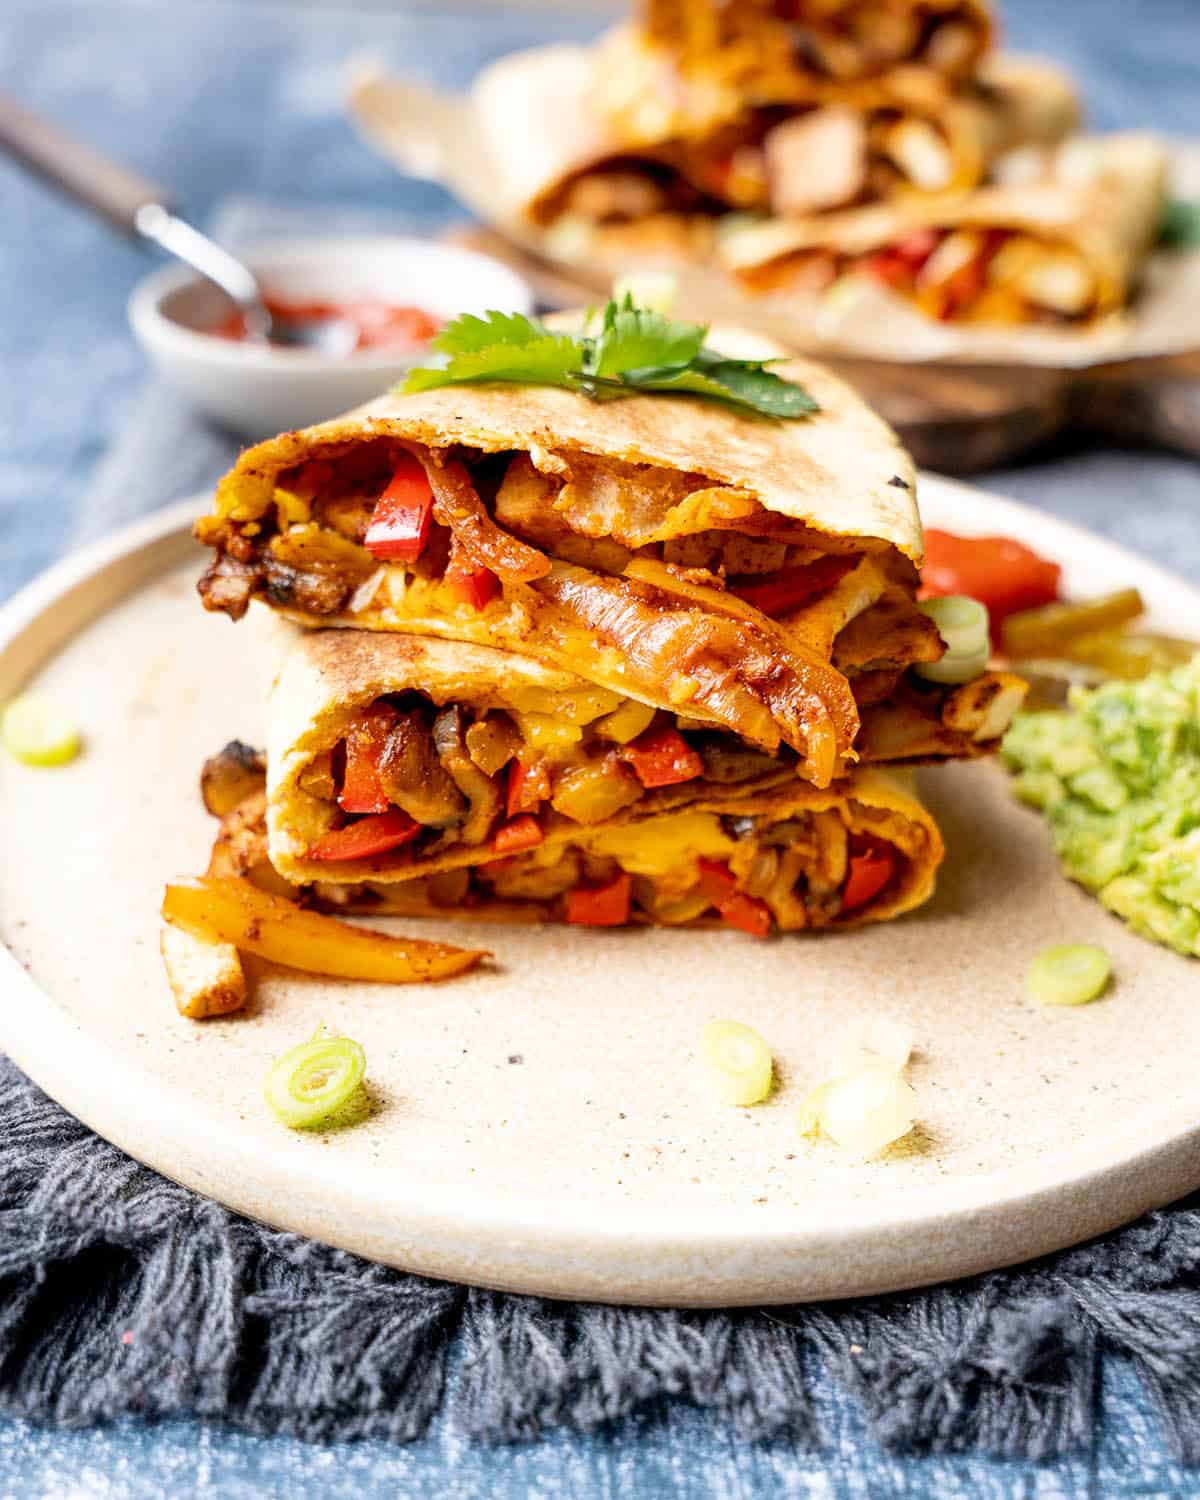 Three pieces of tofu quesadilla with mushrooms and peppers in a stack on a plate.